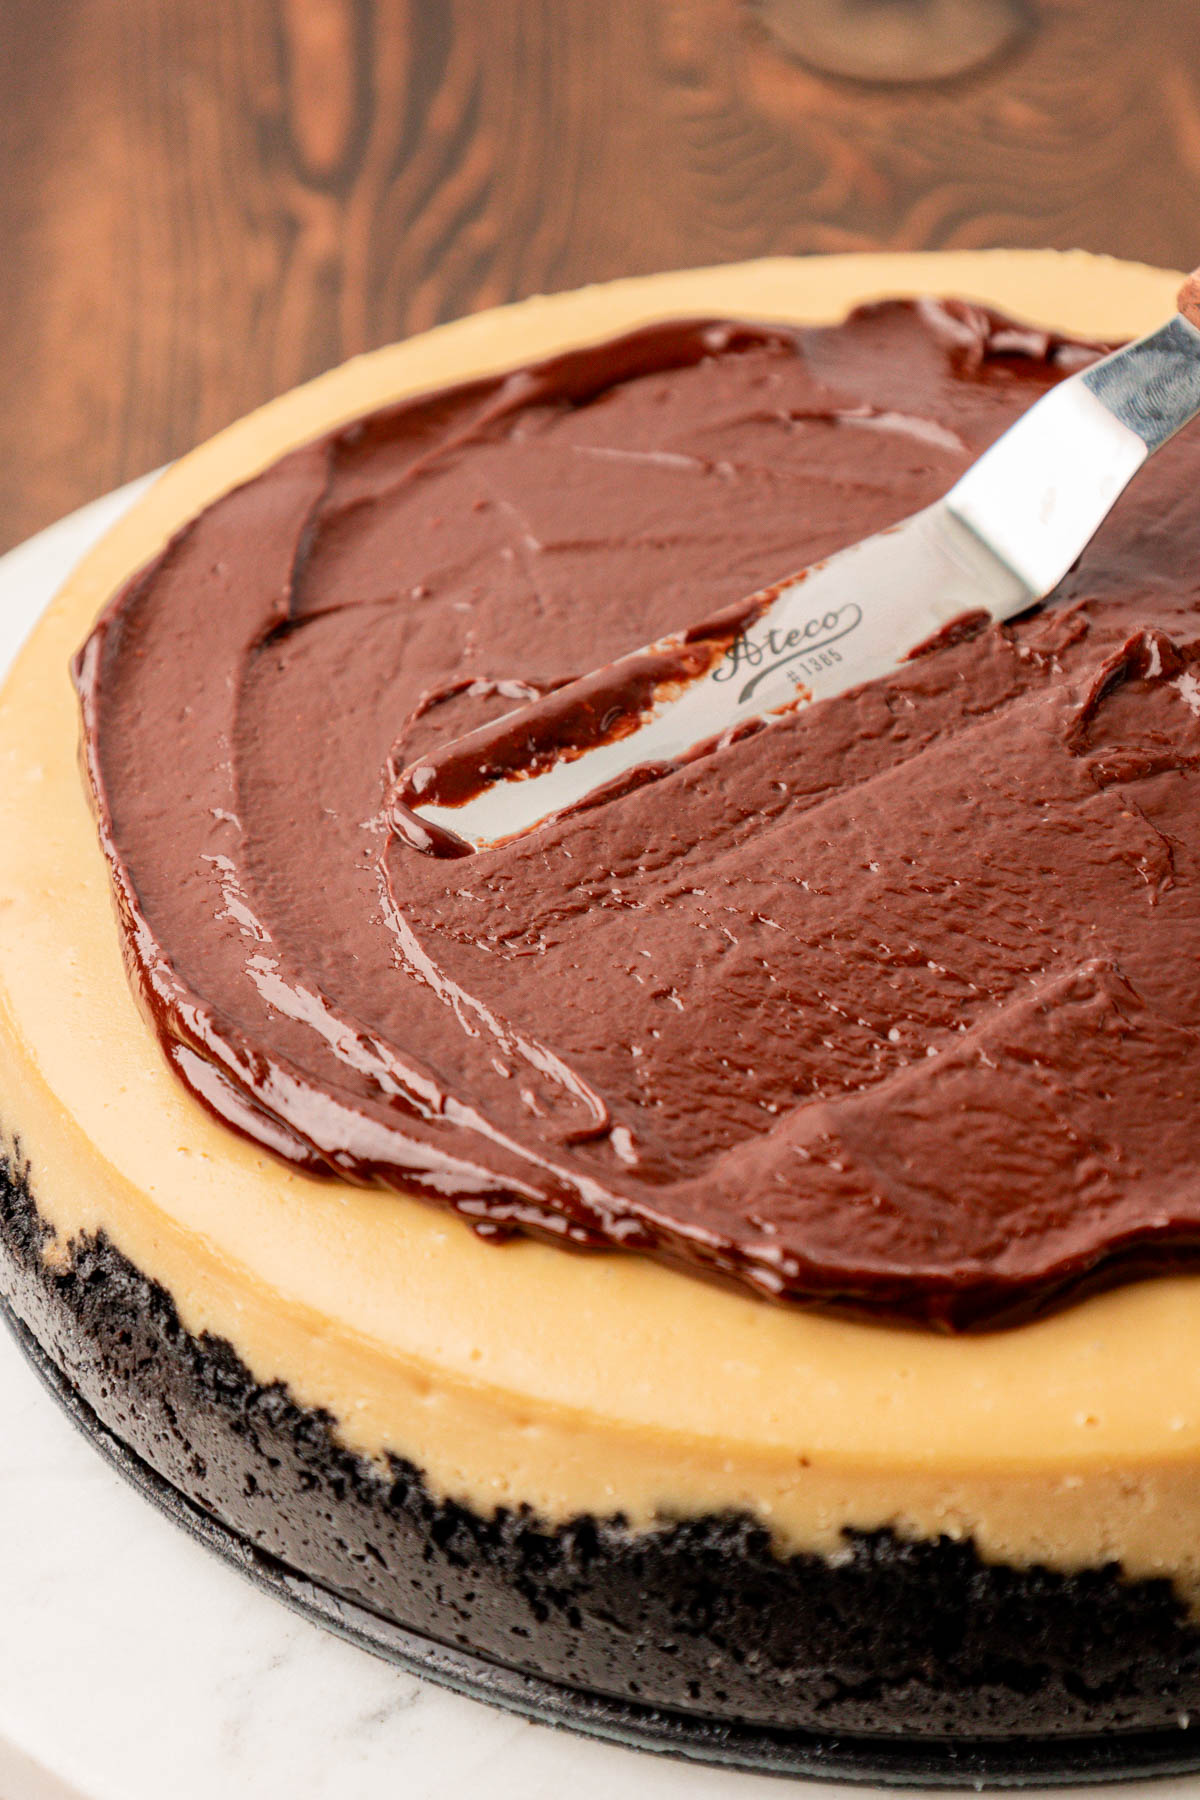 Chocolate ganache being spread over the top of a coffee cheesecake.